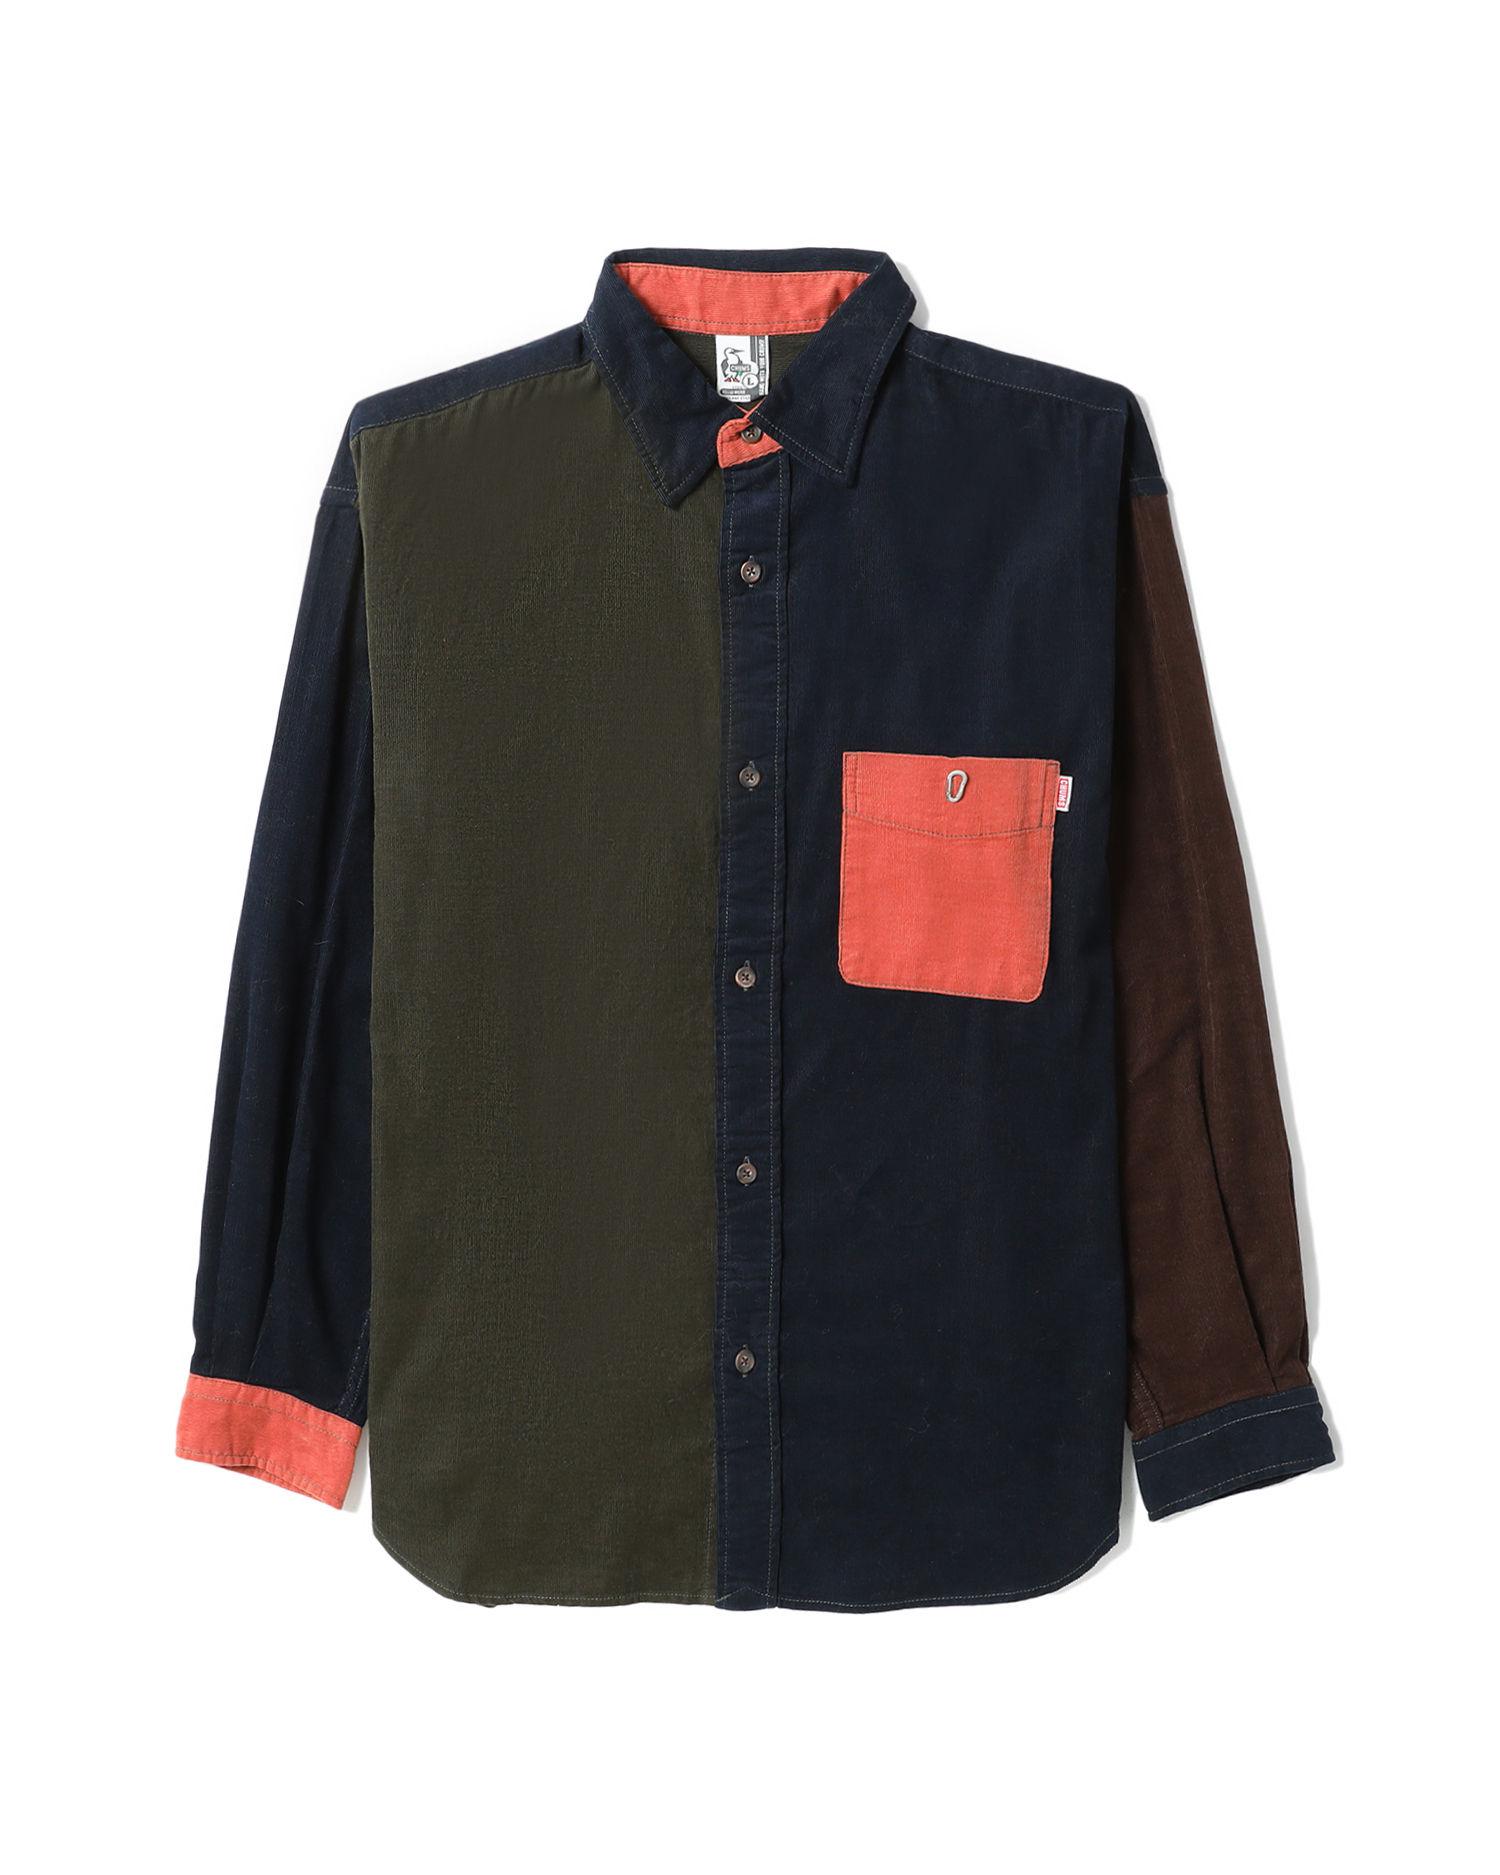 Colour blocked corduroy shirt by CHUMS